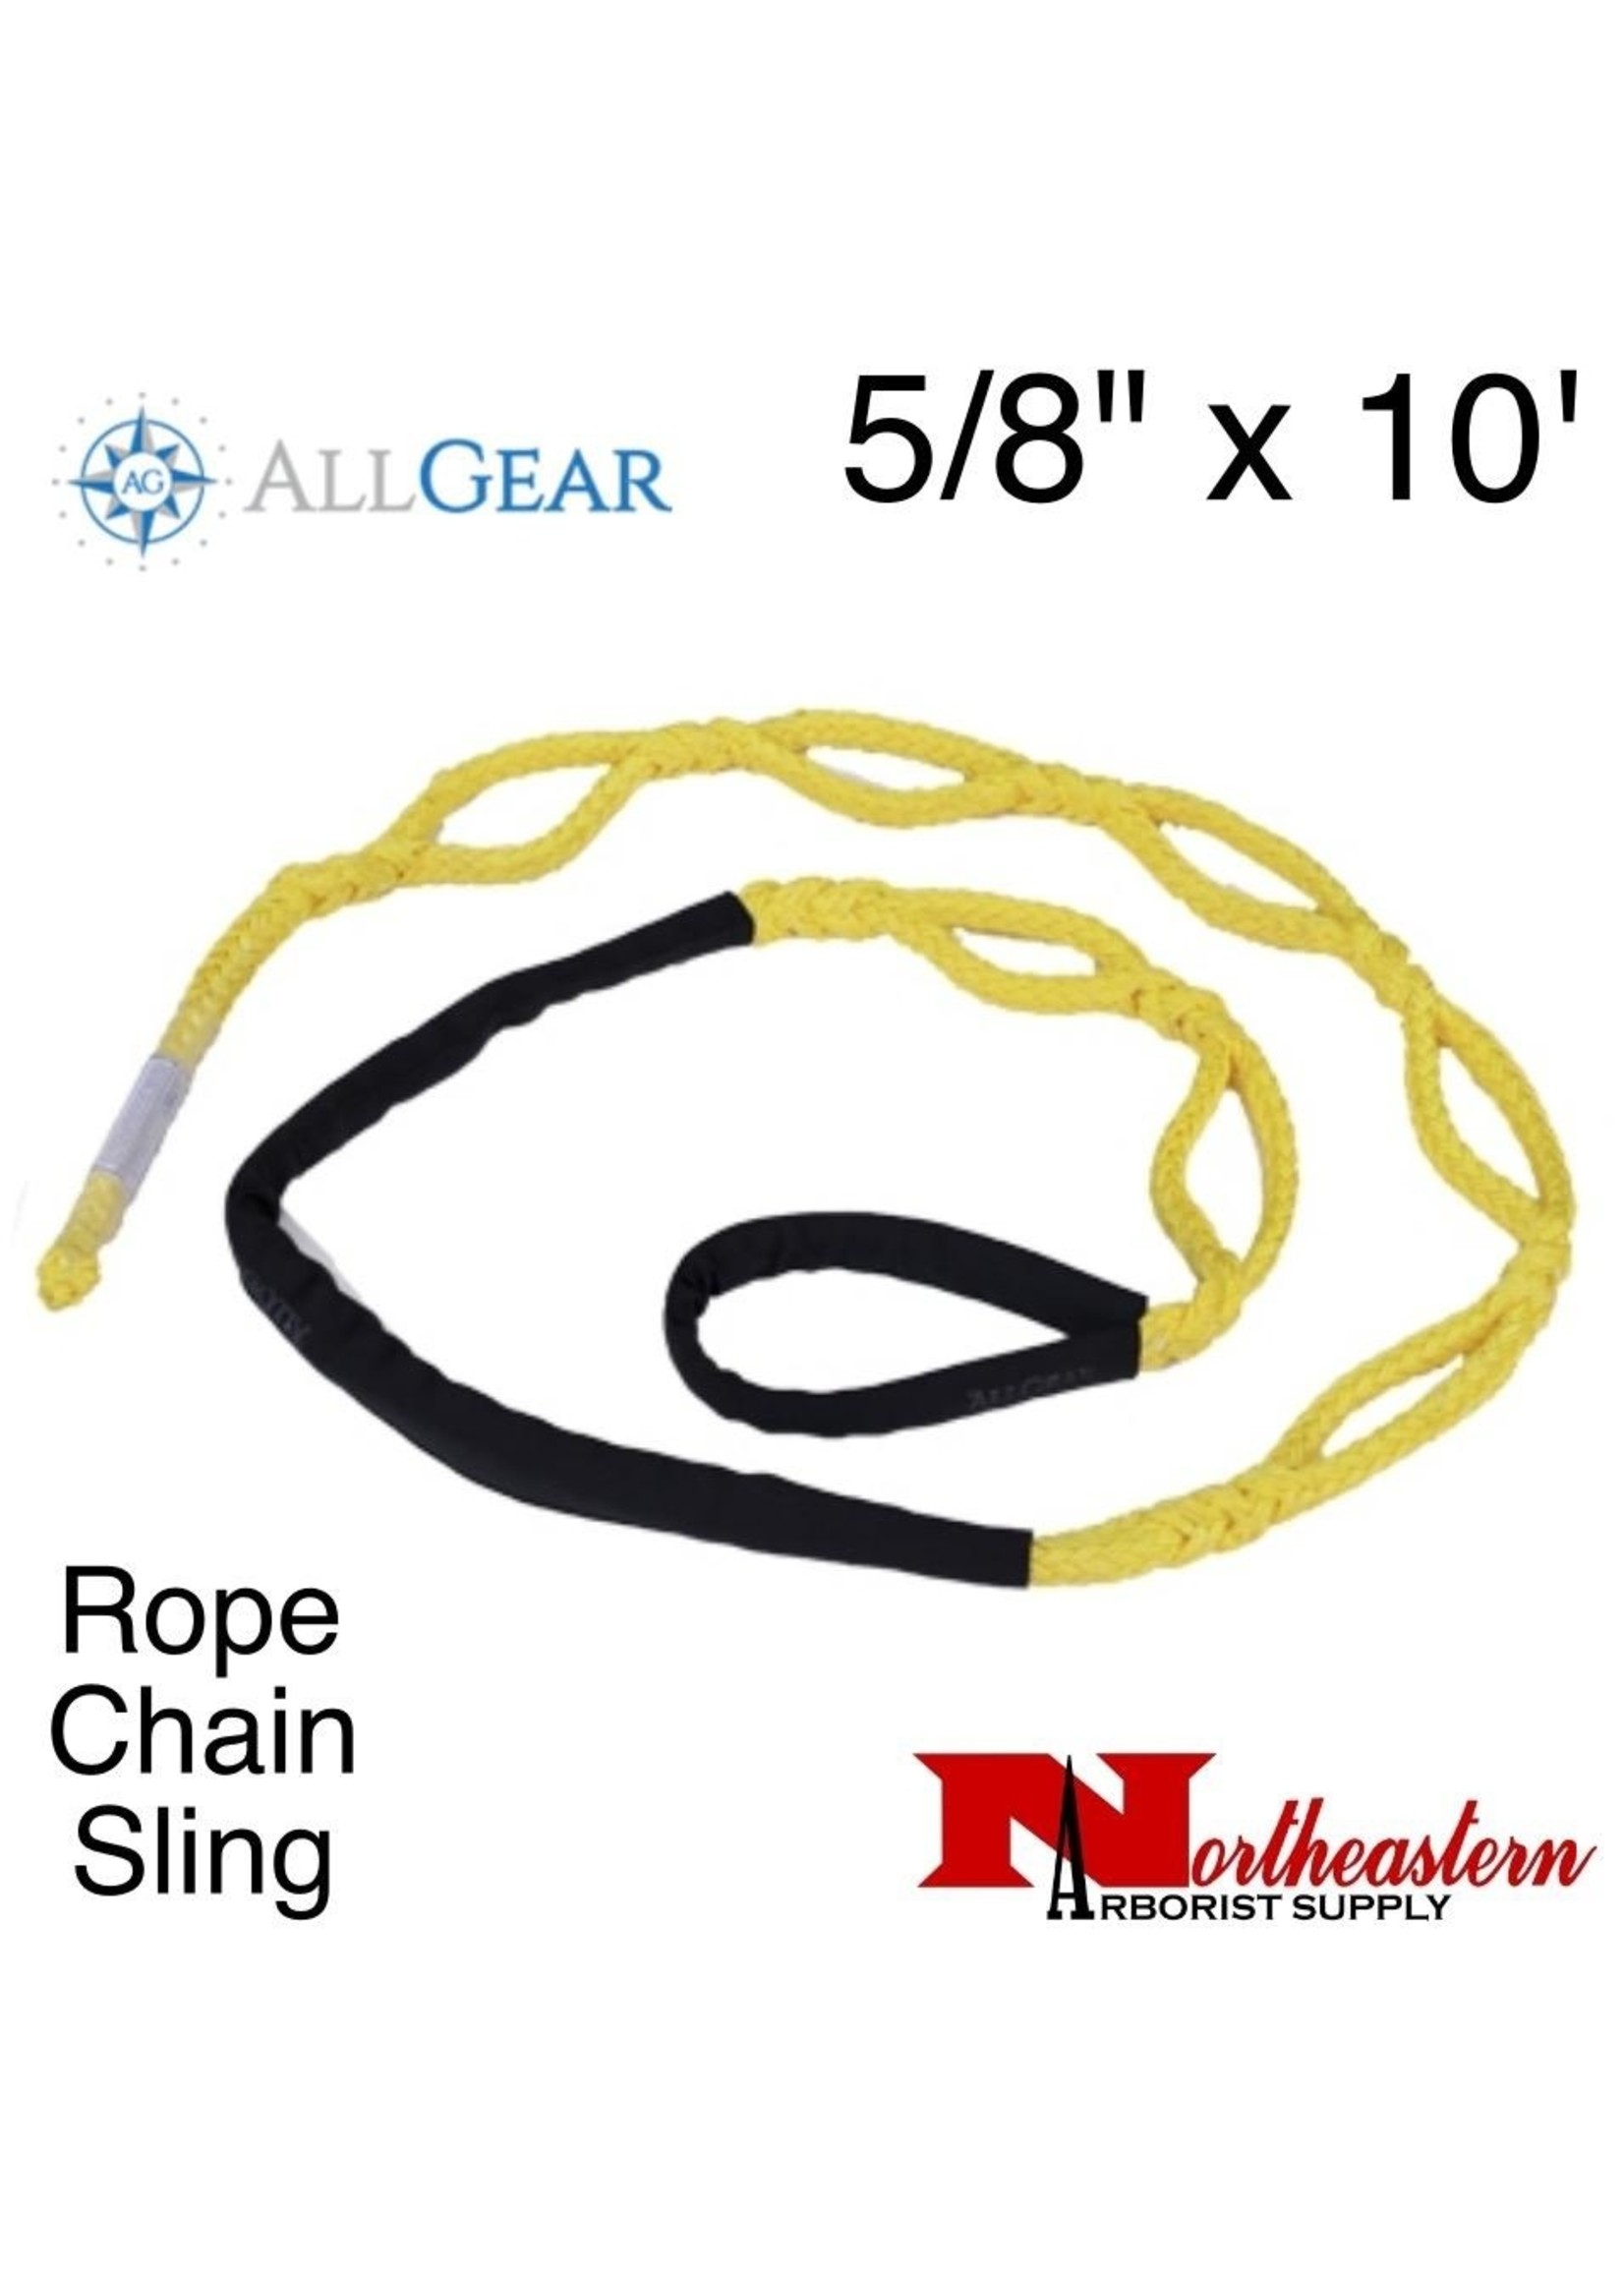 All Gear Inc. Rope Chain Sling 5/8" x 10' 12-Strand 10 Rig Pockets. 16,000 Lbs. Avg. Tensile